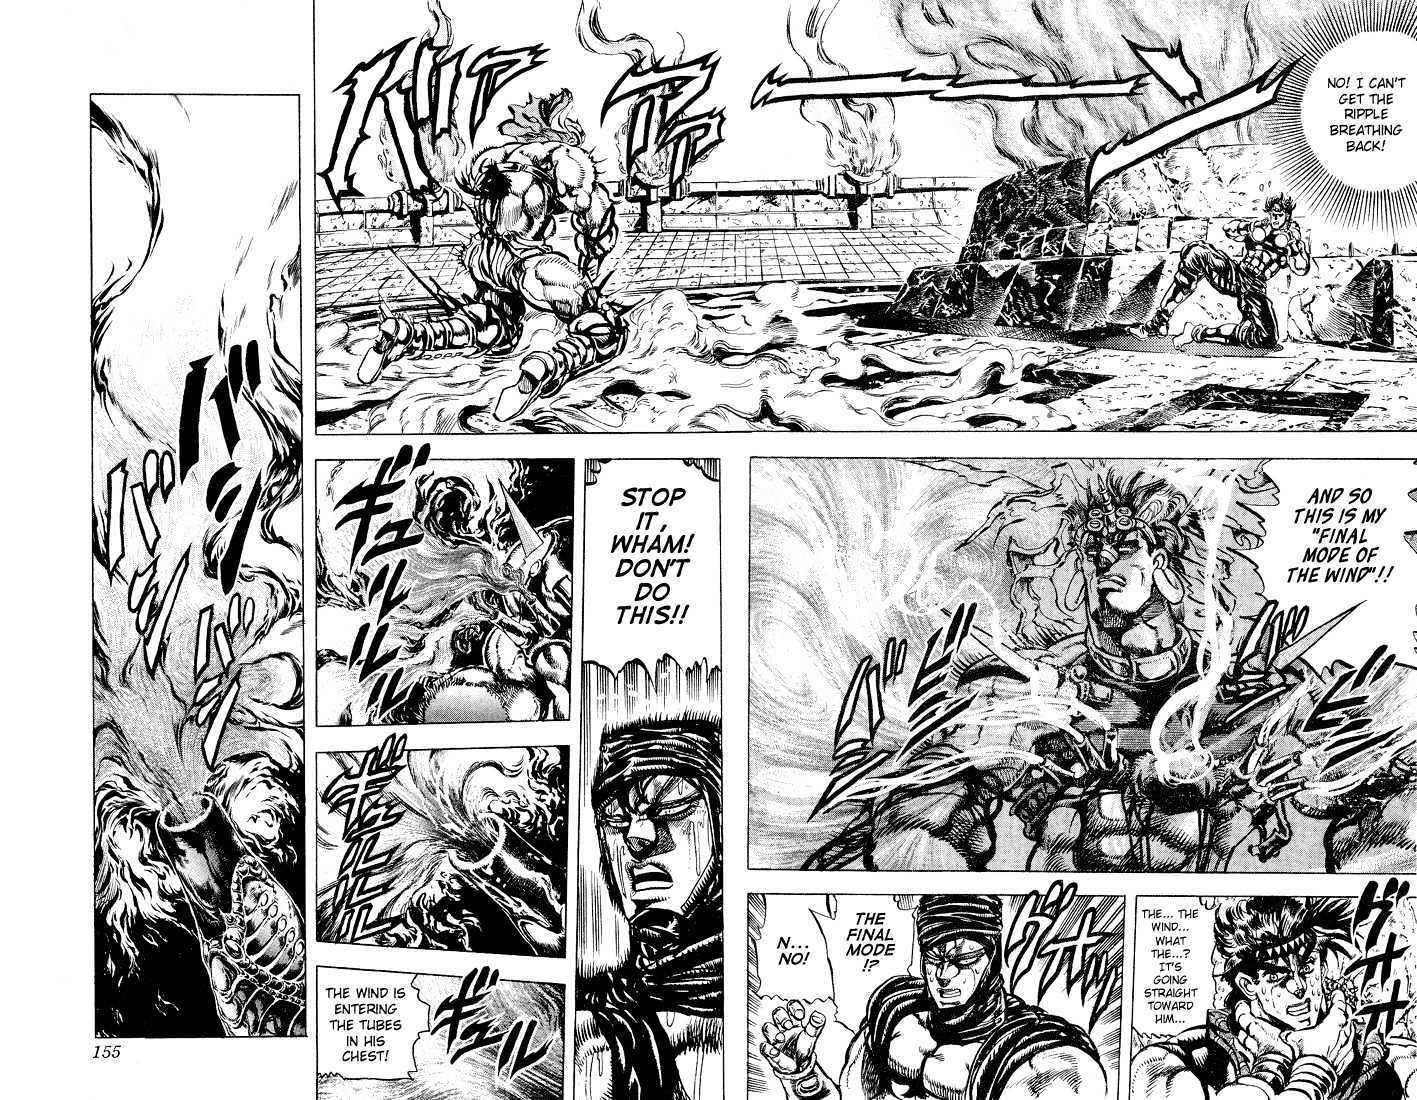 Jojo's Bizarre Adventure Vol.11 Chapter 103 : The Final Mode Of The Wind page 7 - 